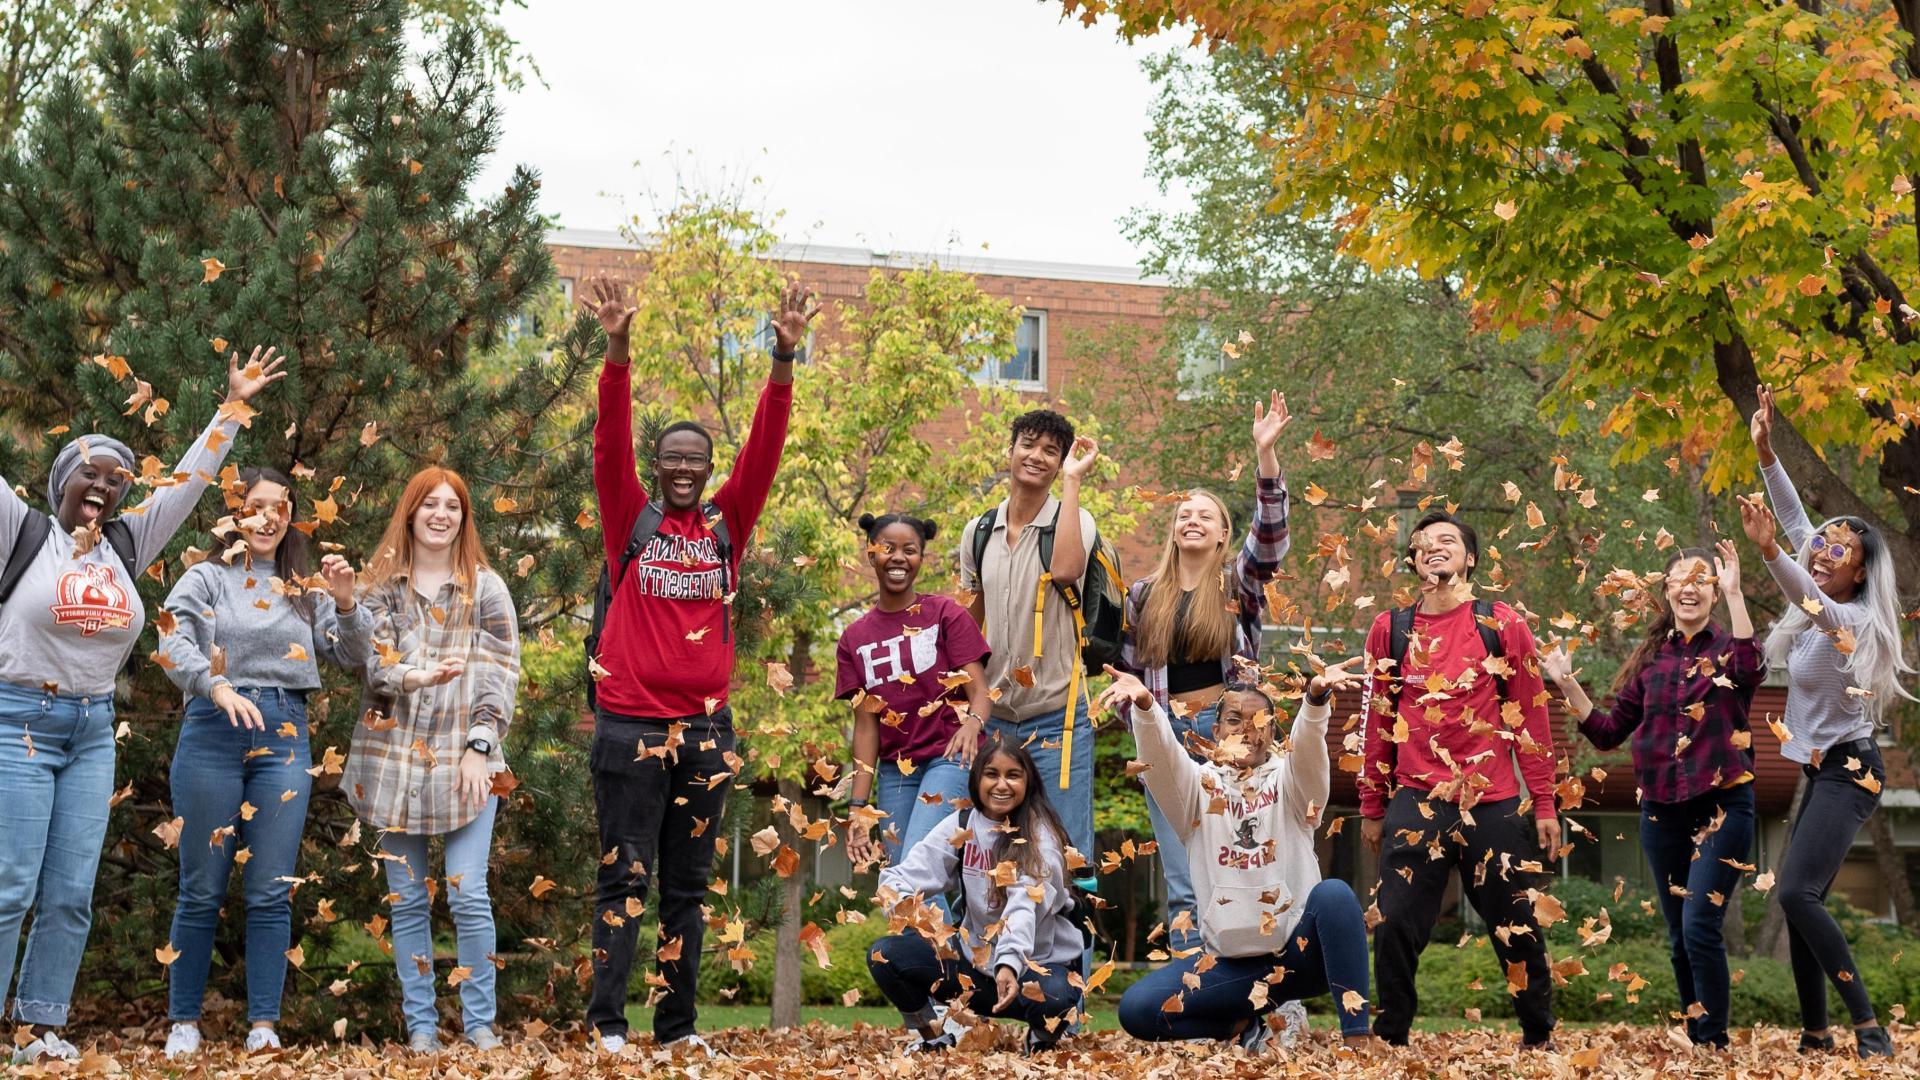  Hamline happy students at Hamline during the fall blowing the leafs